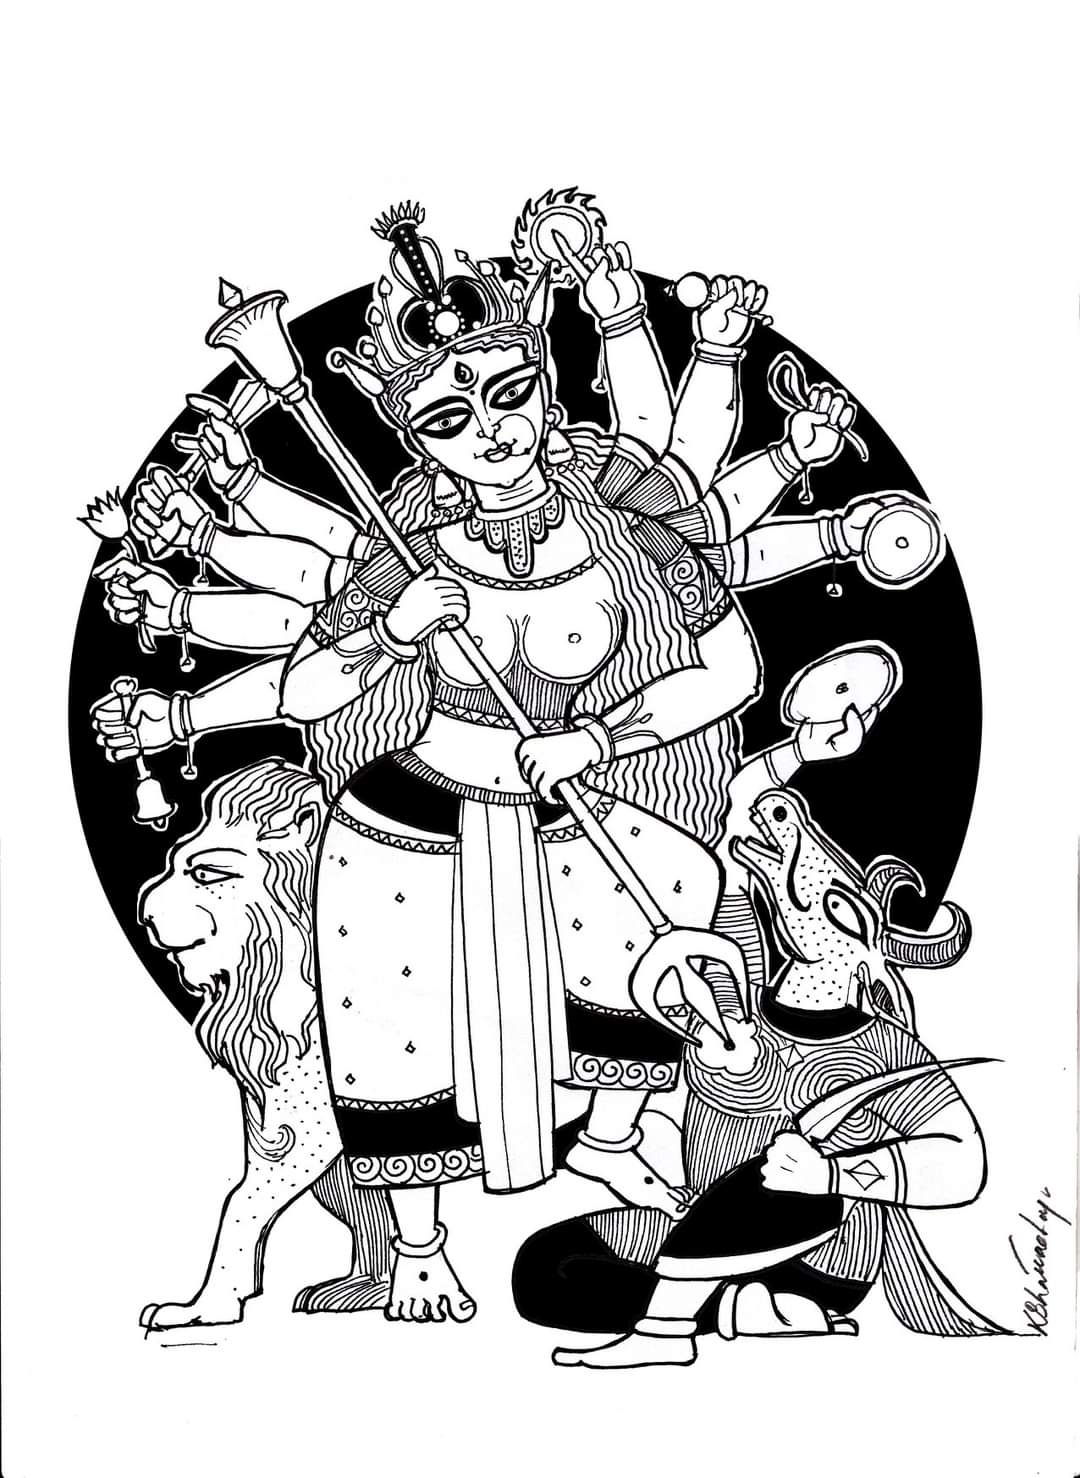 Goddess Durga sketch for this Durga Puja This took 3hrs to complete  r drawing